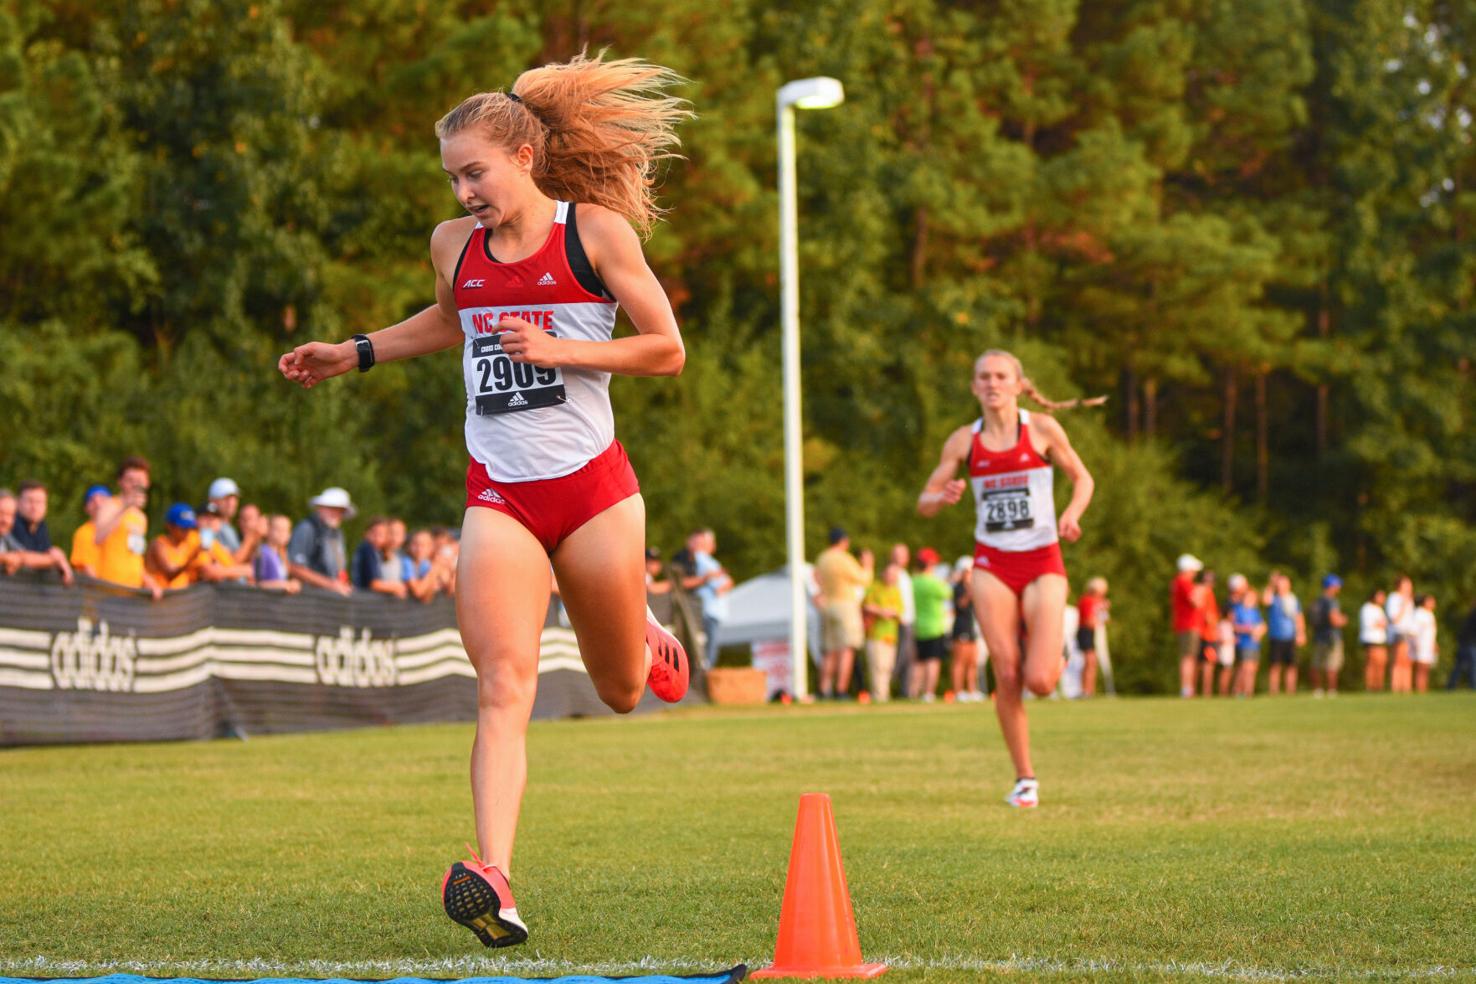 BacktoBack NC State women’s cross country 2022 NCAA Champions